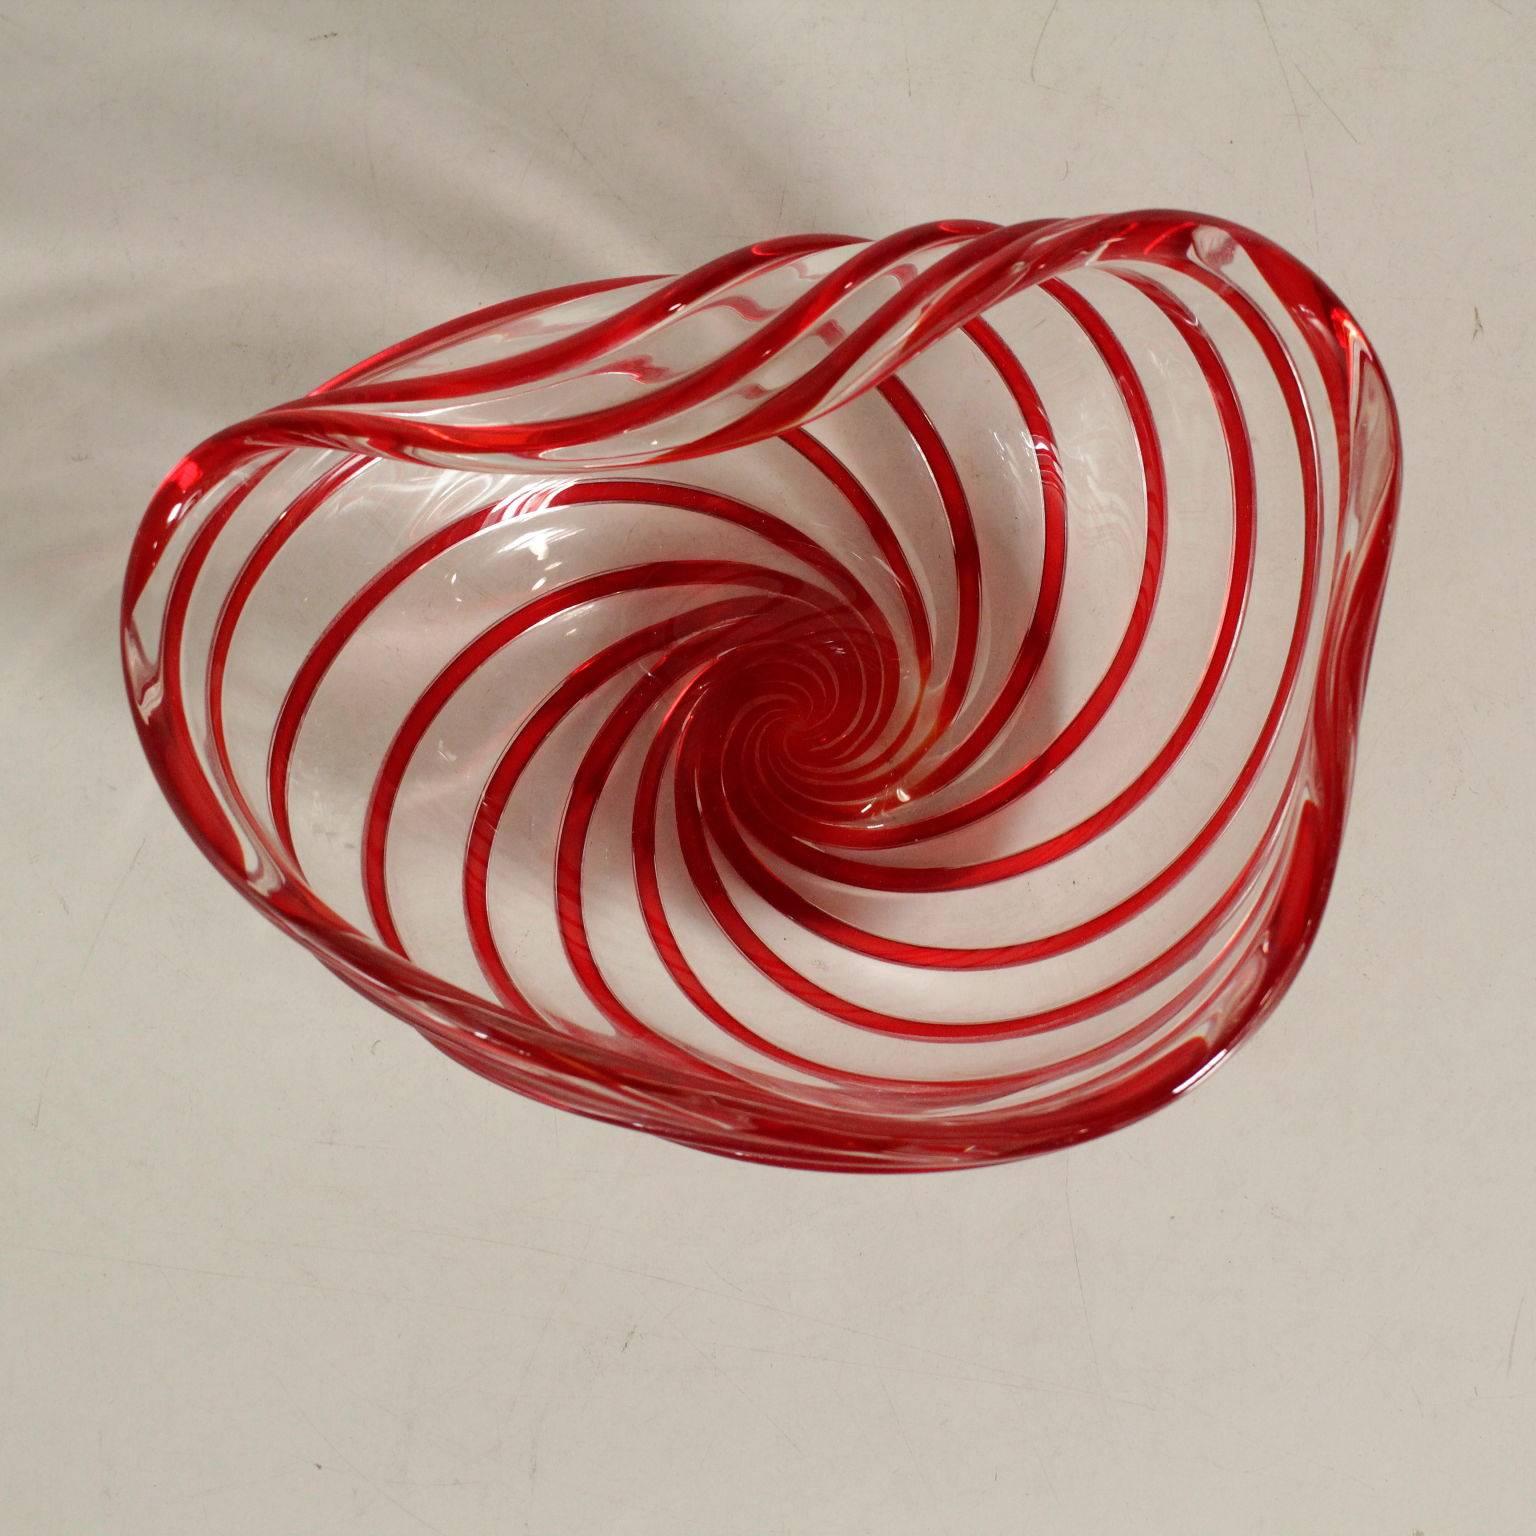 Italian Bicolor Centerpiece by Archimede Seguso Blown Glass Brand Vintage Italy, 1960s